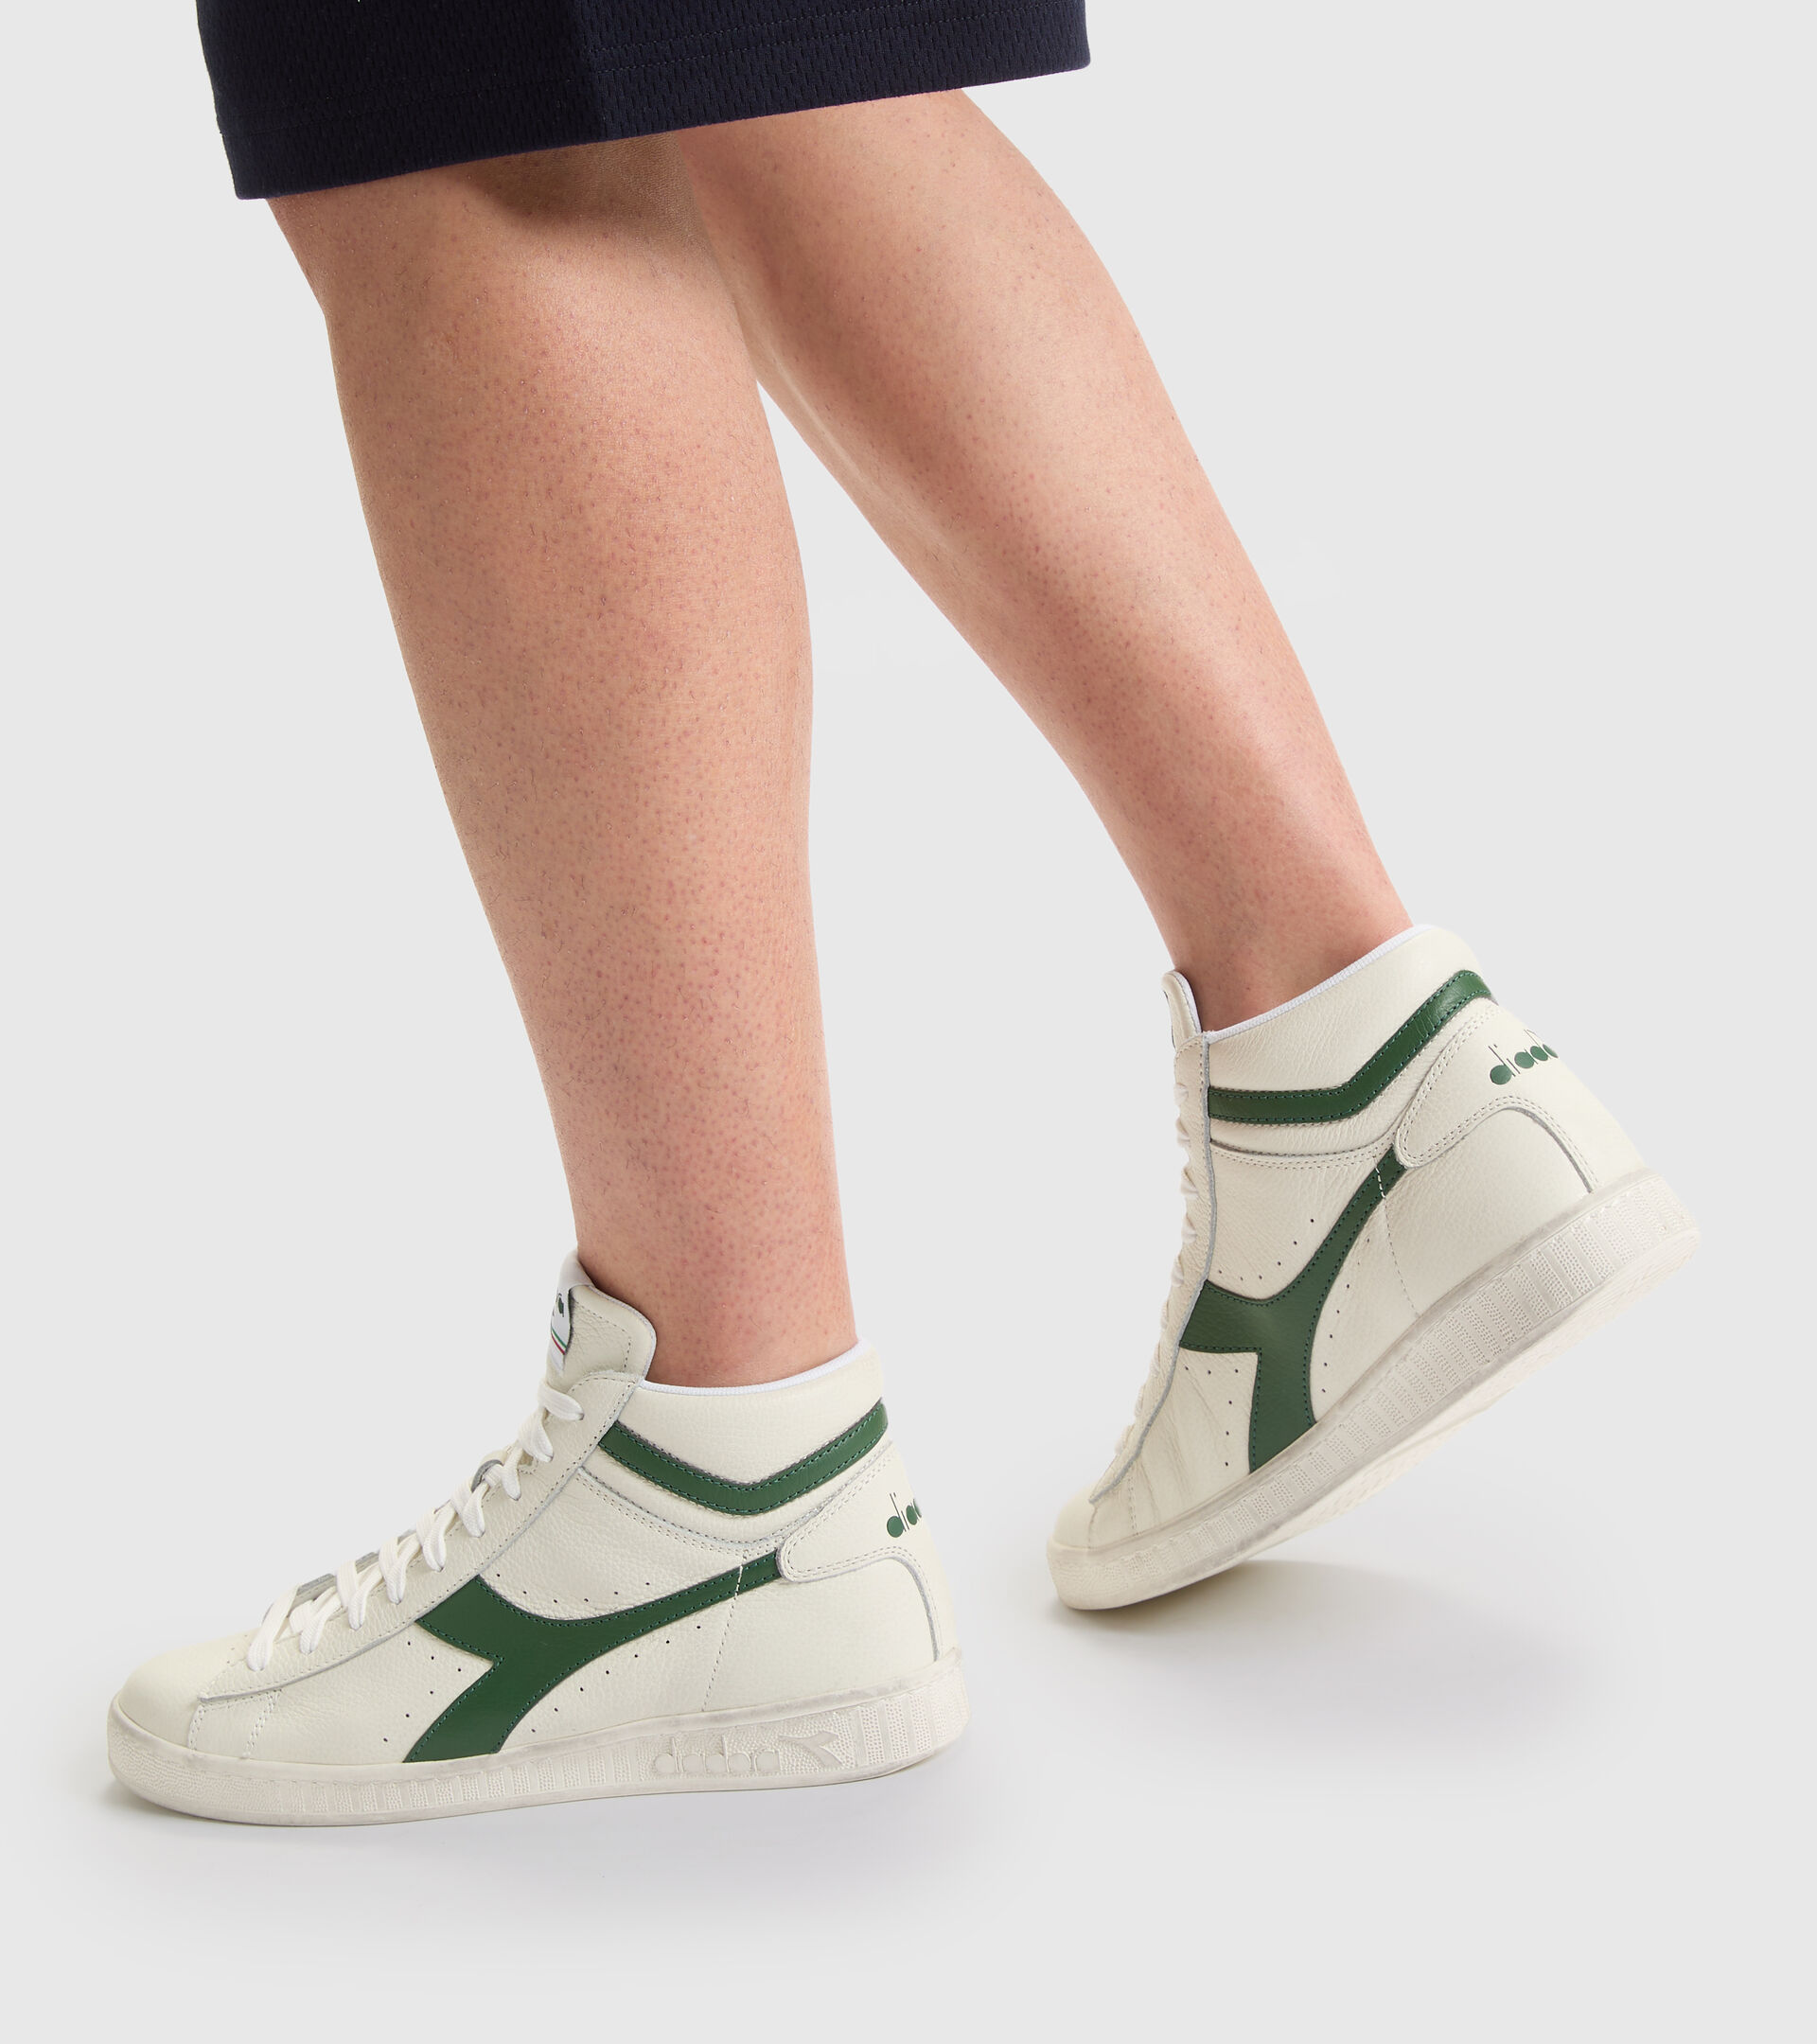 GAME L HIGH WAXED Sporty sneakers - Unisex - Diadora Online Store ZA